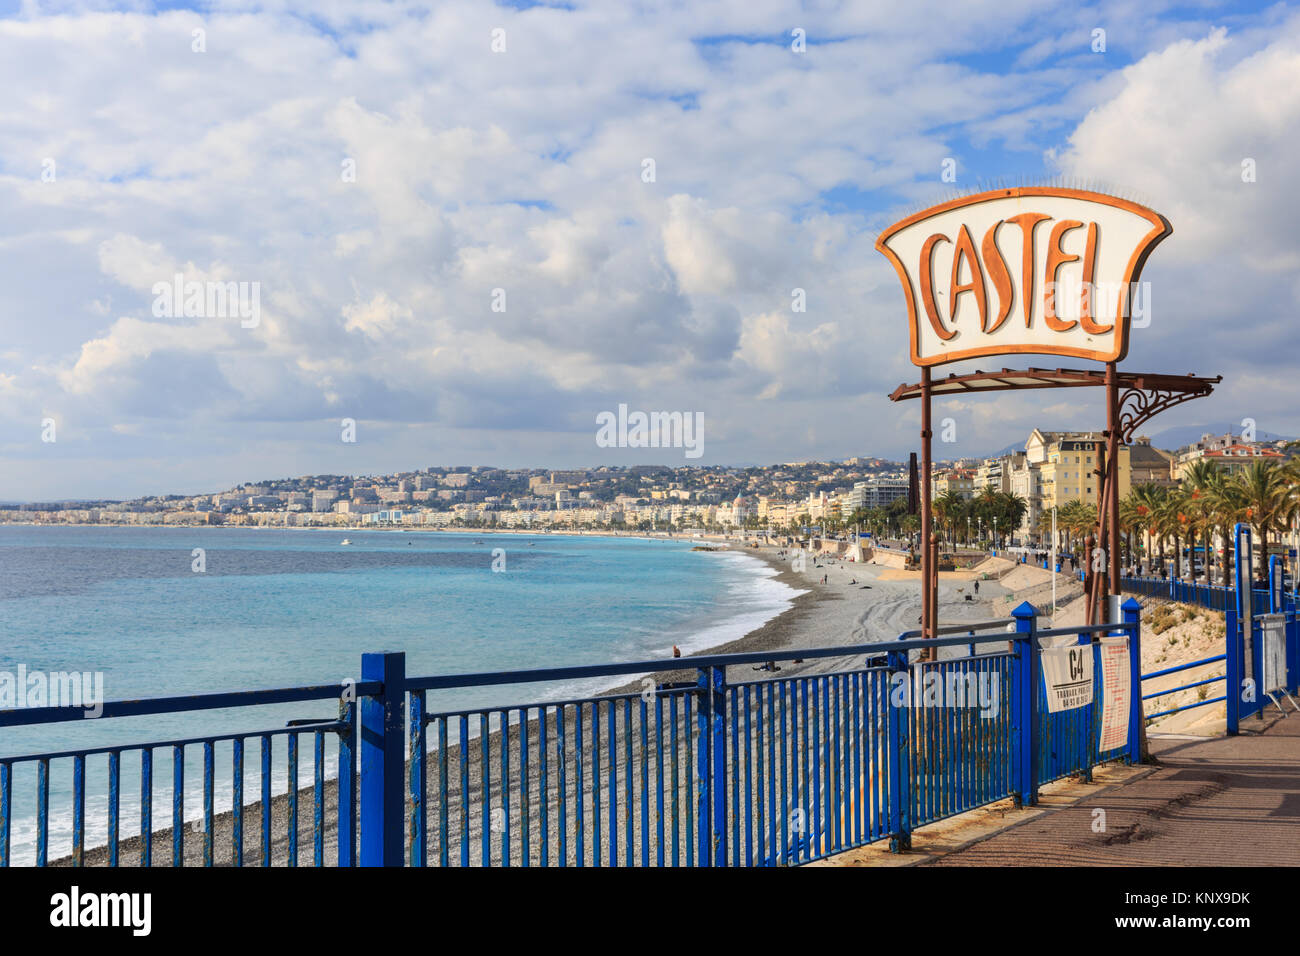 Castel beach sign with Nice beach and seafront, Nice, French Riviera, Cote d'Azur, France Stock Photo